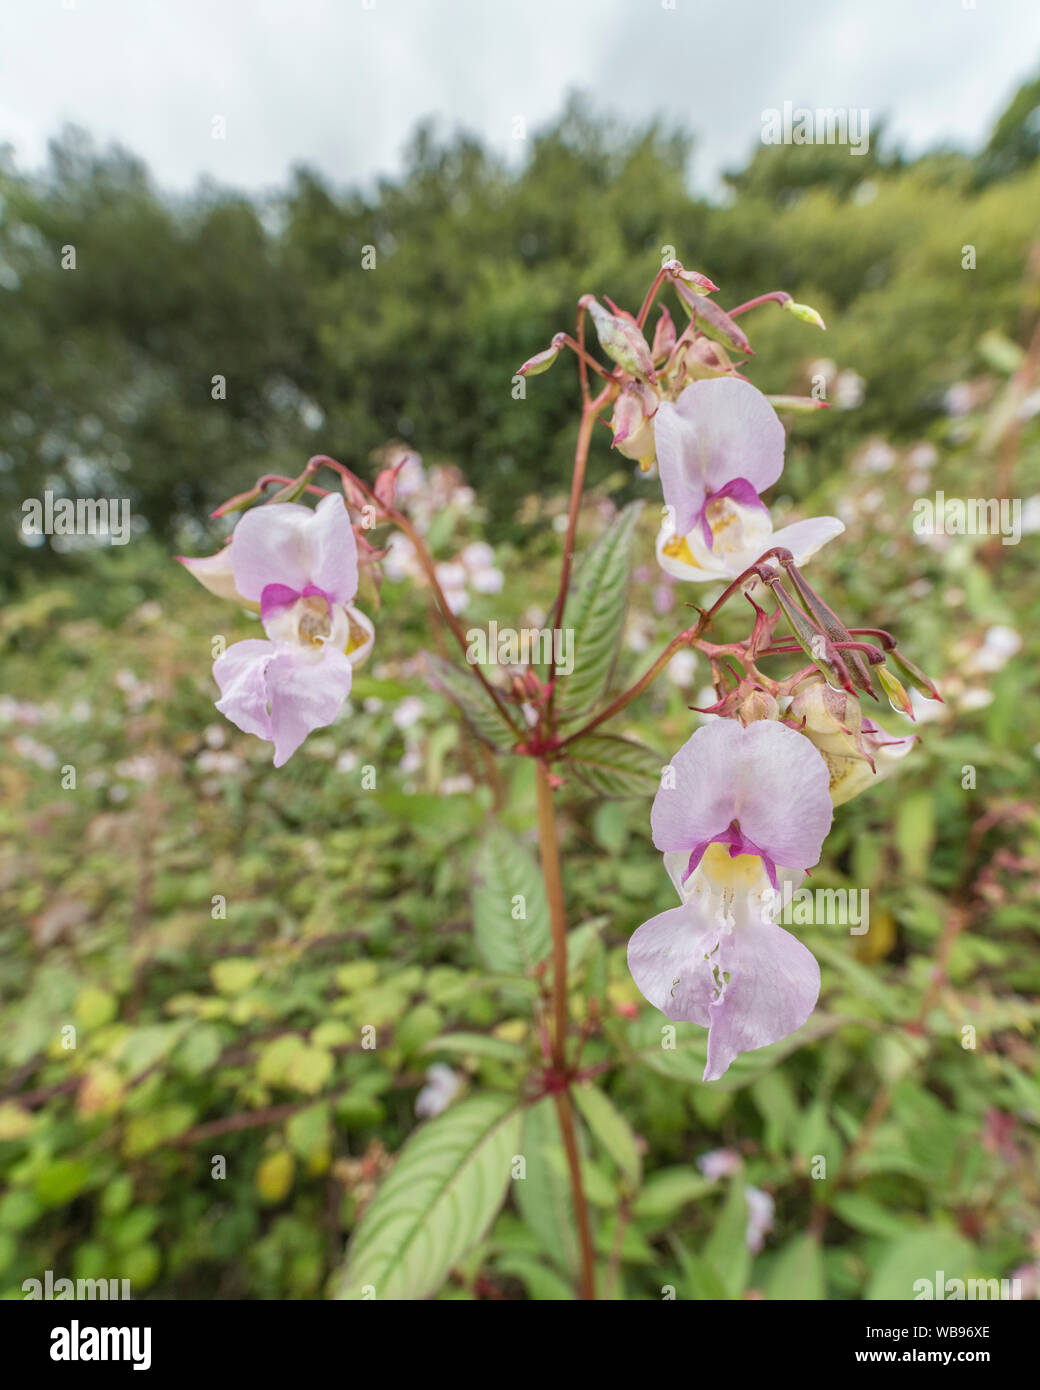 Flowers and upper leaves of a troublesome Himalayan Balsam / Impatiens glandulifera weed patch. Likes damp soils / ground. Himalayan balsam invasion. Stock Photo